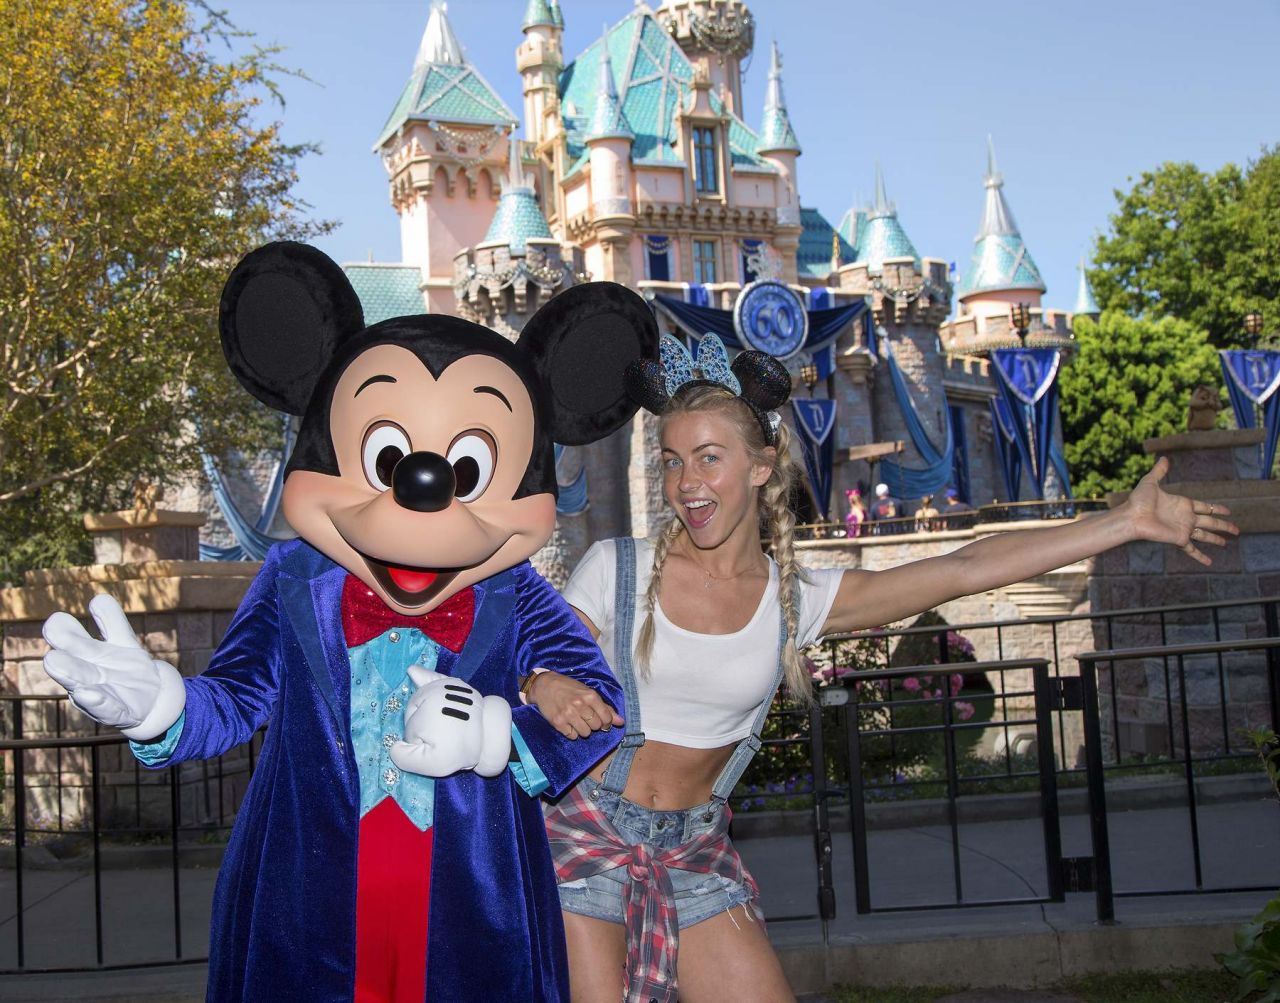 julianne-hough-out-at-disneyland-6-30-2016-8.